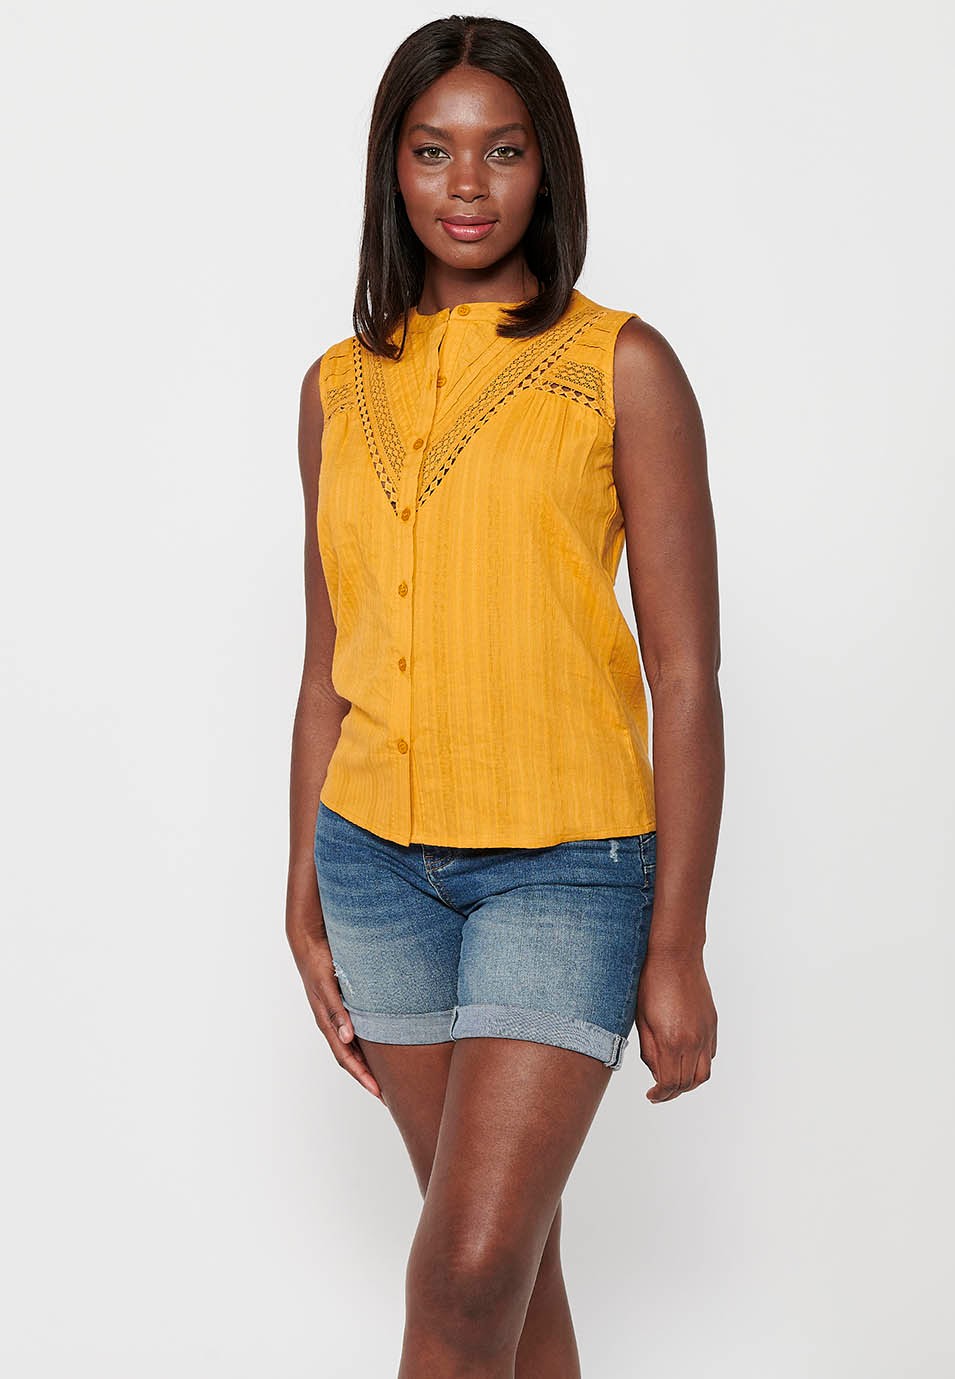 Sleeveless Cotton Blouse with Round Neck and Front Closure with Buttons and Embroidered Details in Mustard Color for Women